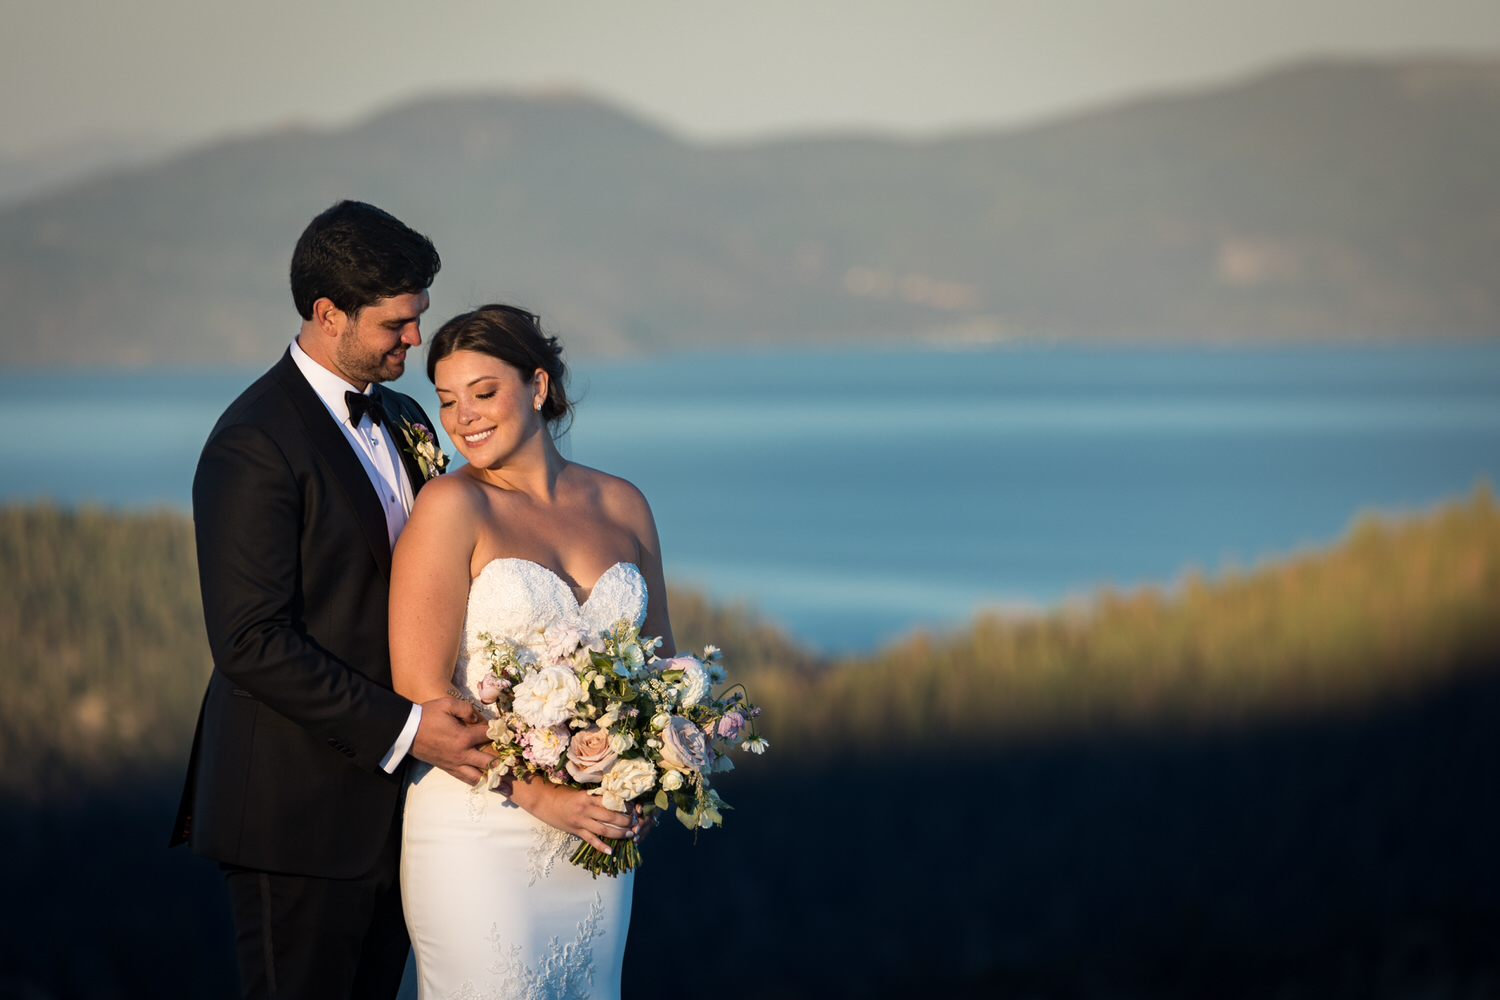 Sunset portrait of a bride and groom with Lake Tahoe in the background.